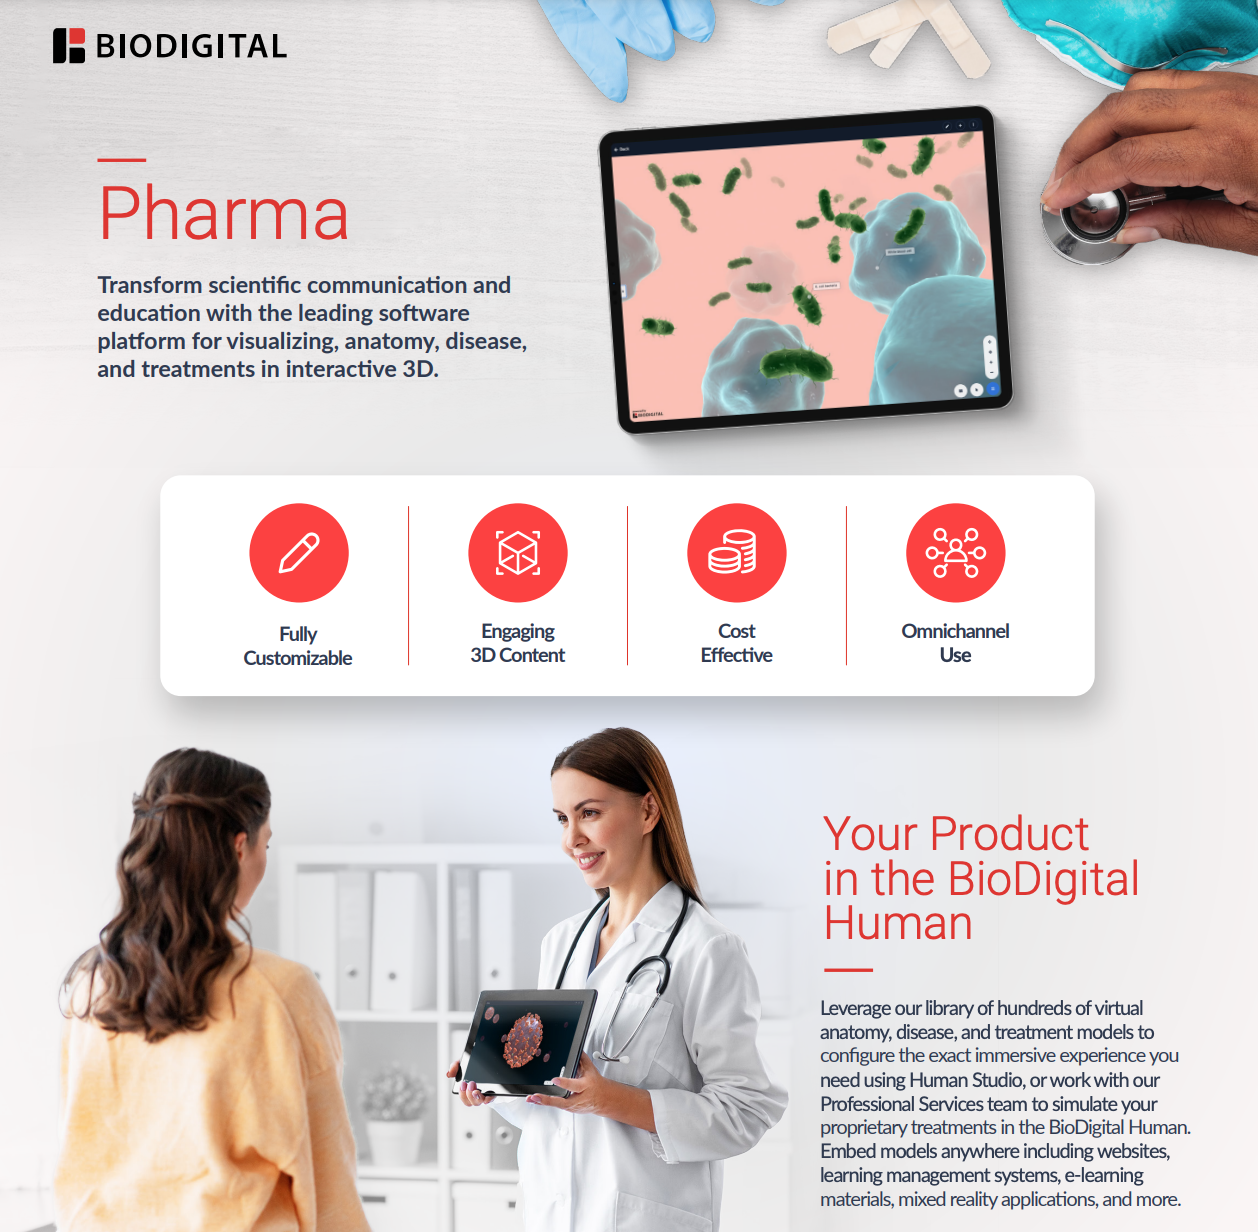 Your Product in the BioDigital Human